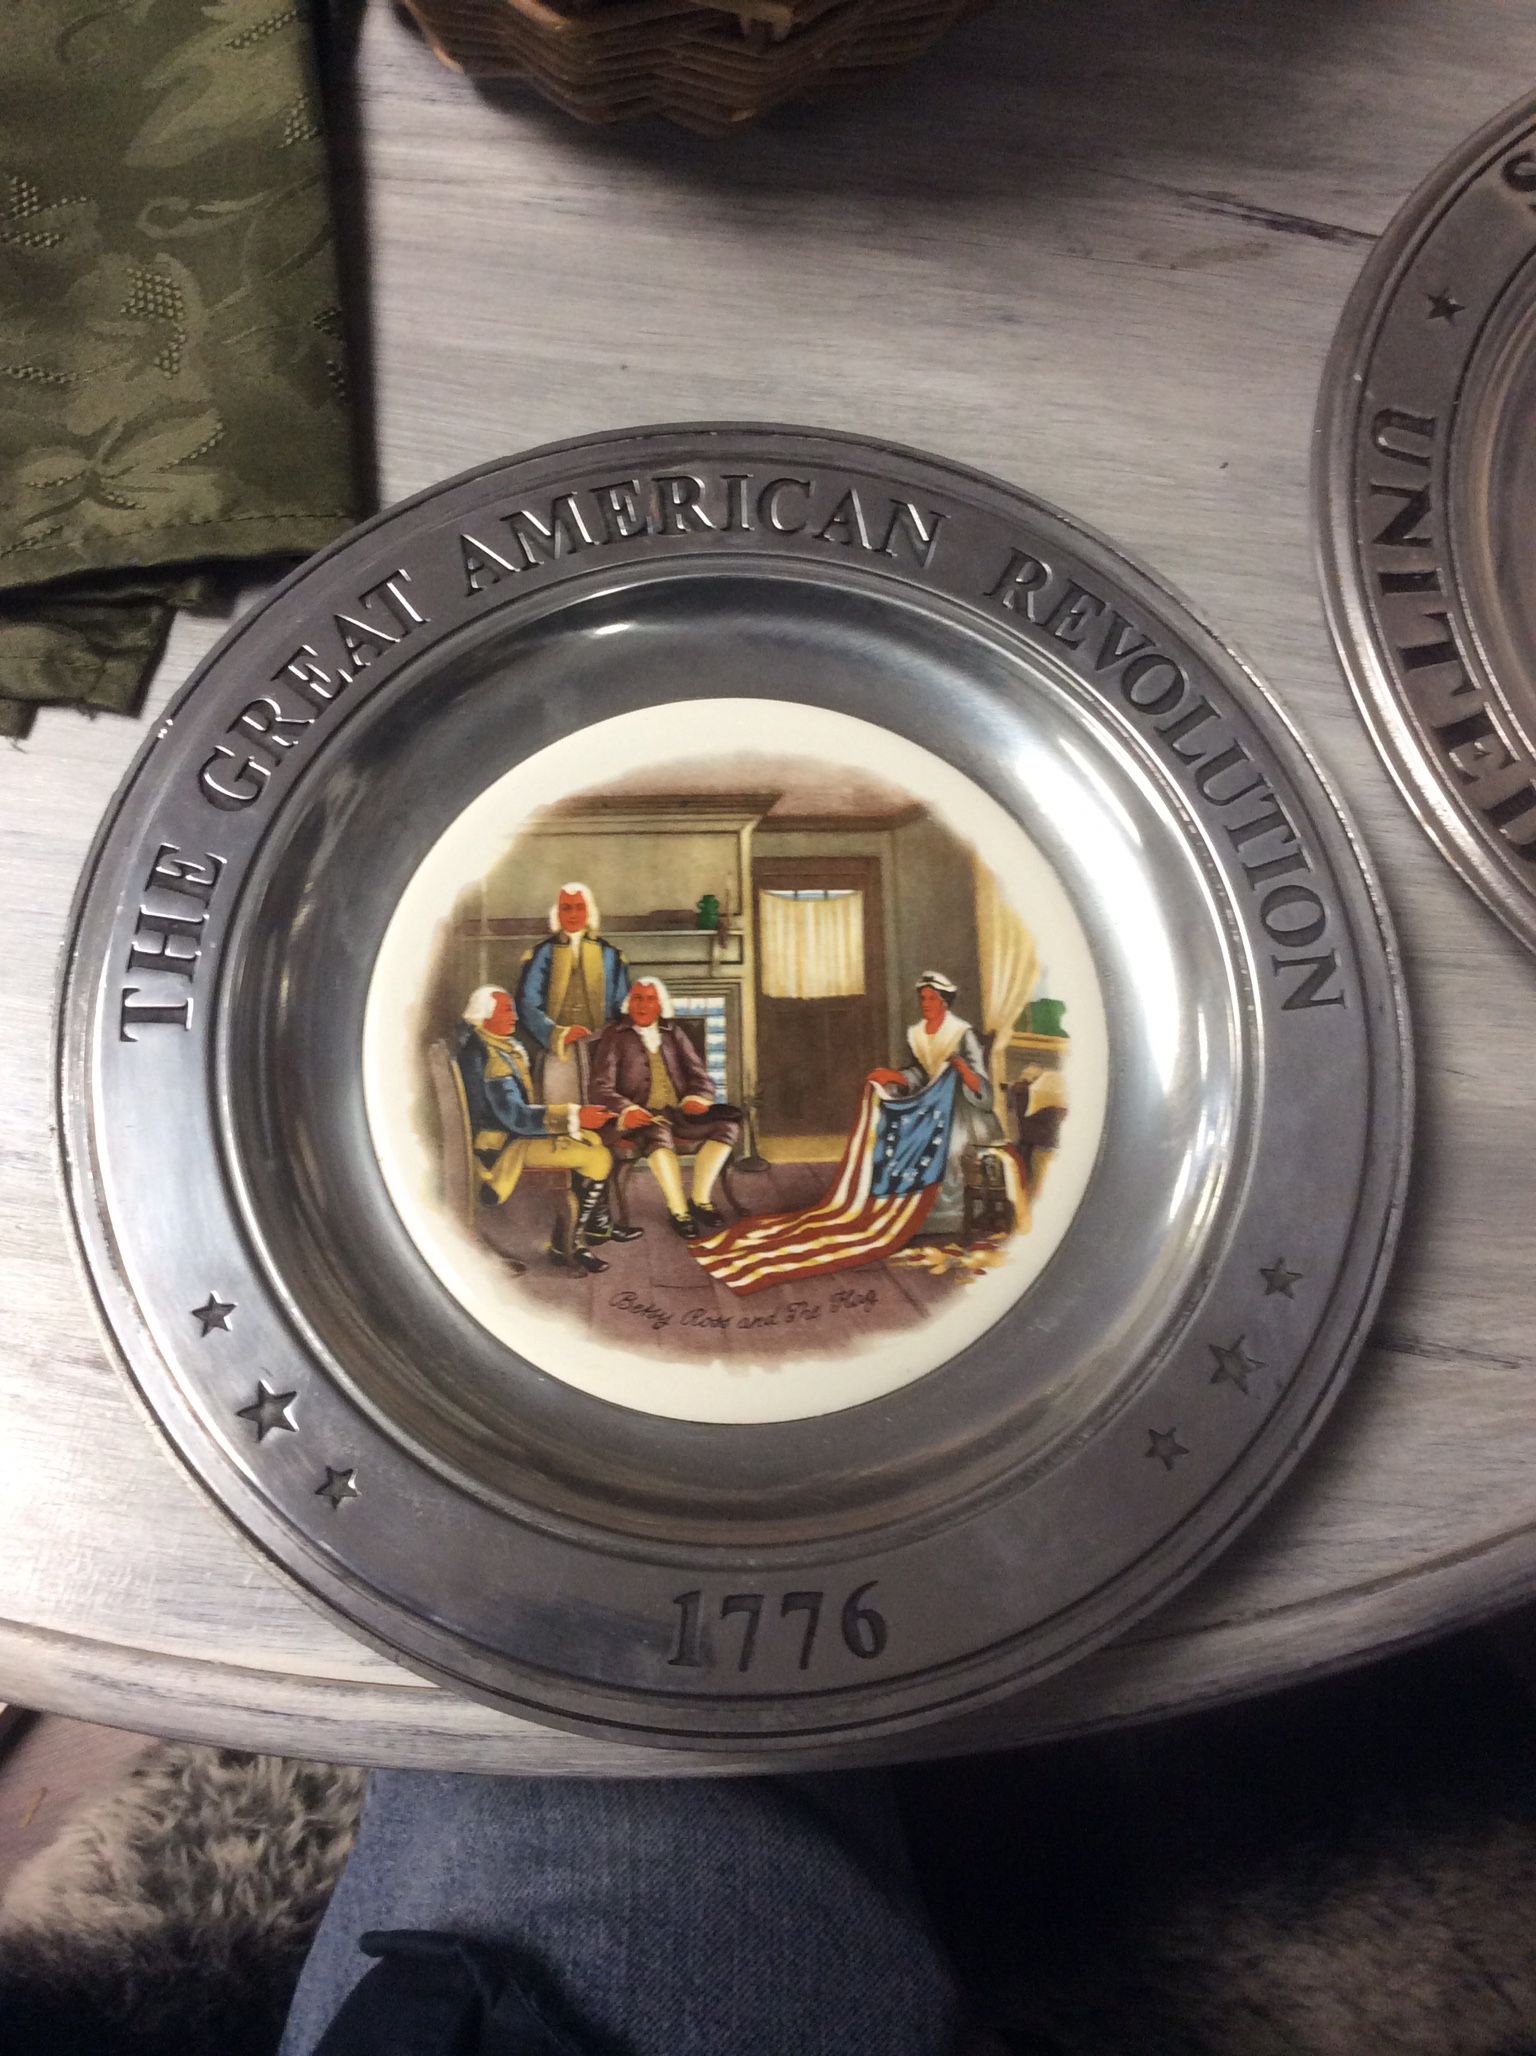 The Great American Revolution 1776 Betsy Ross and the Flag Pewter Plate